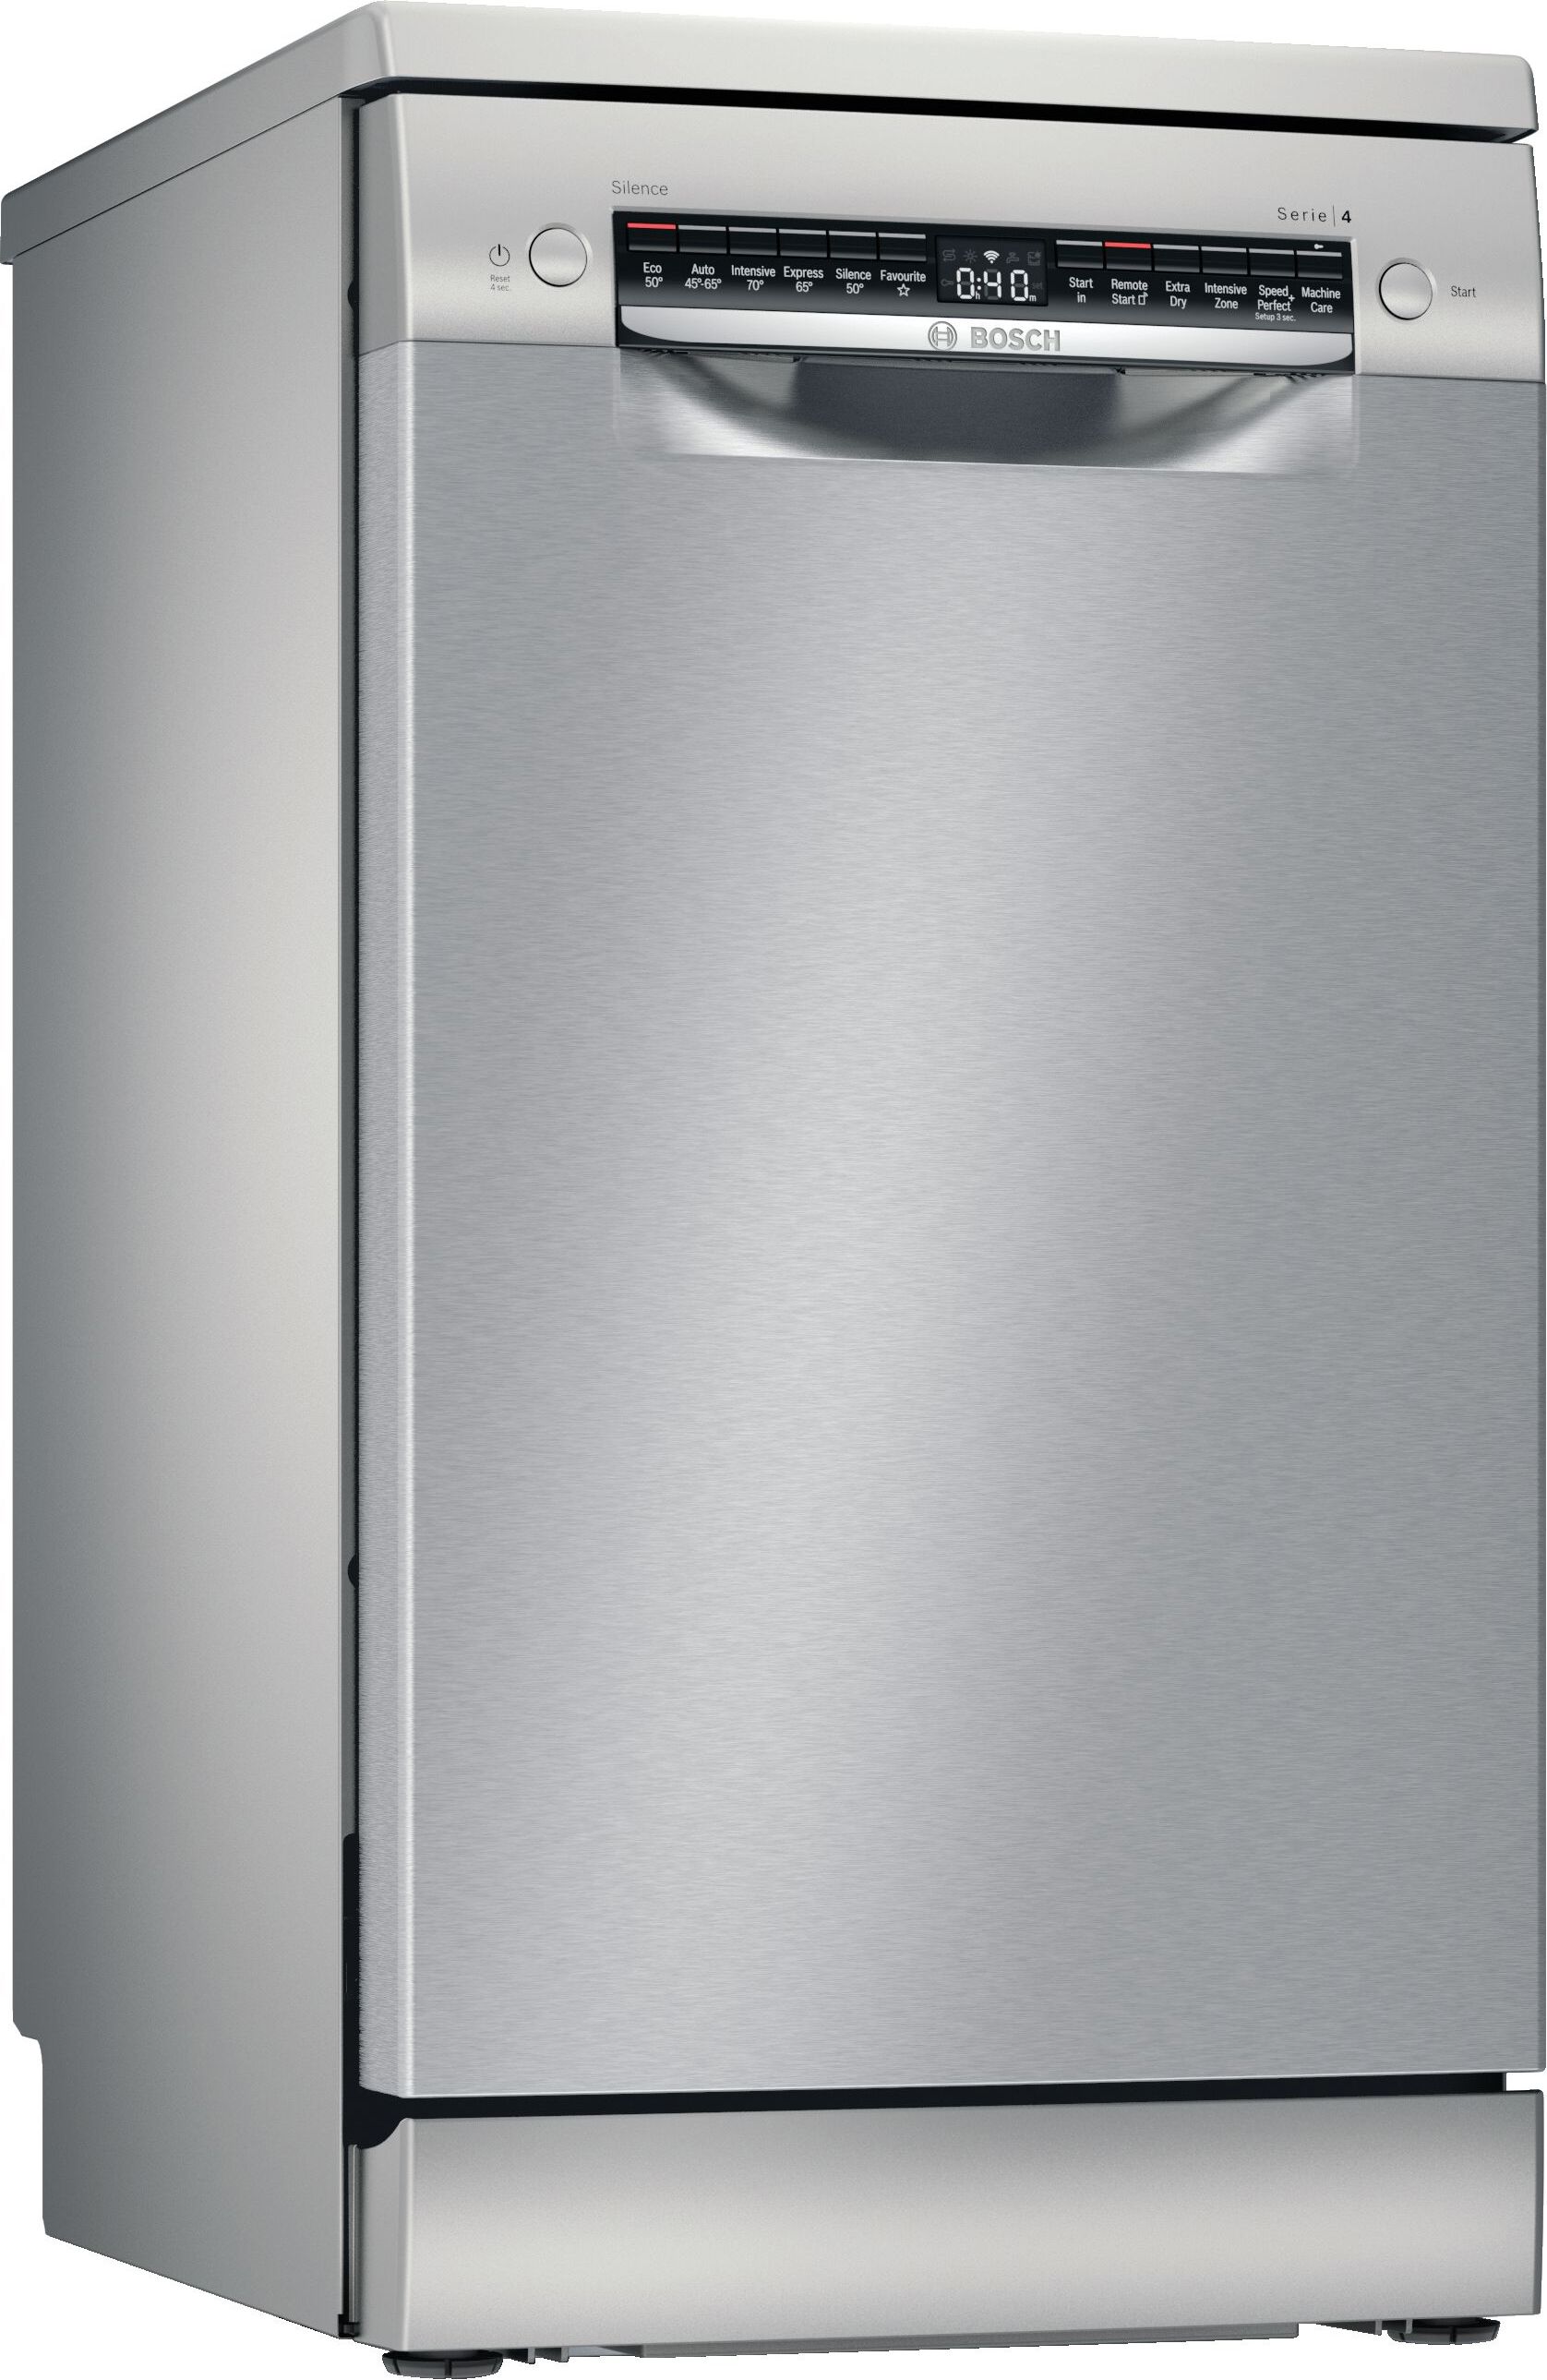 Bosch Series 4 SPS4HKI45G Wifi Connected Slimline Dishwasher - Silver - E Rated, Silver